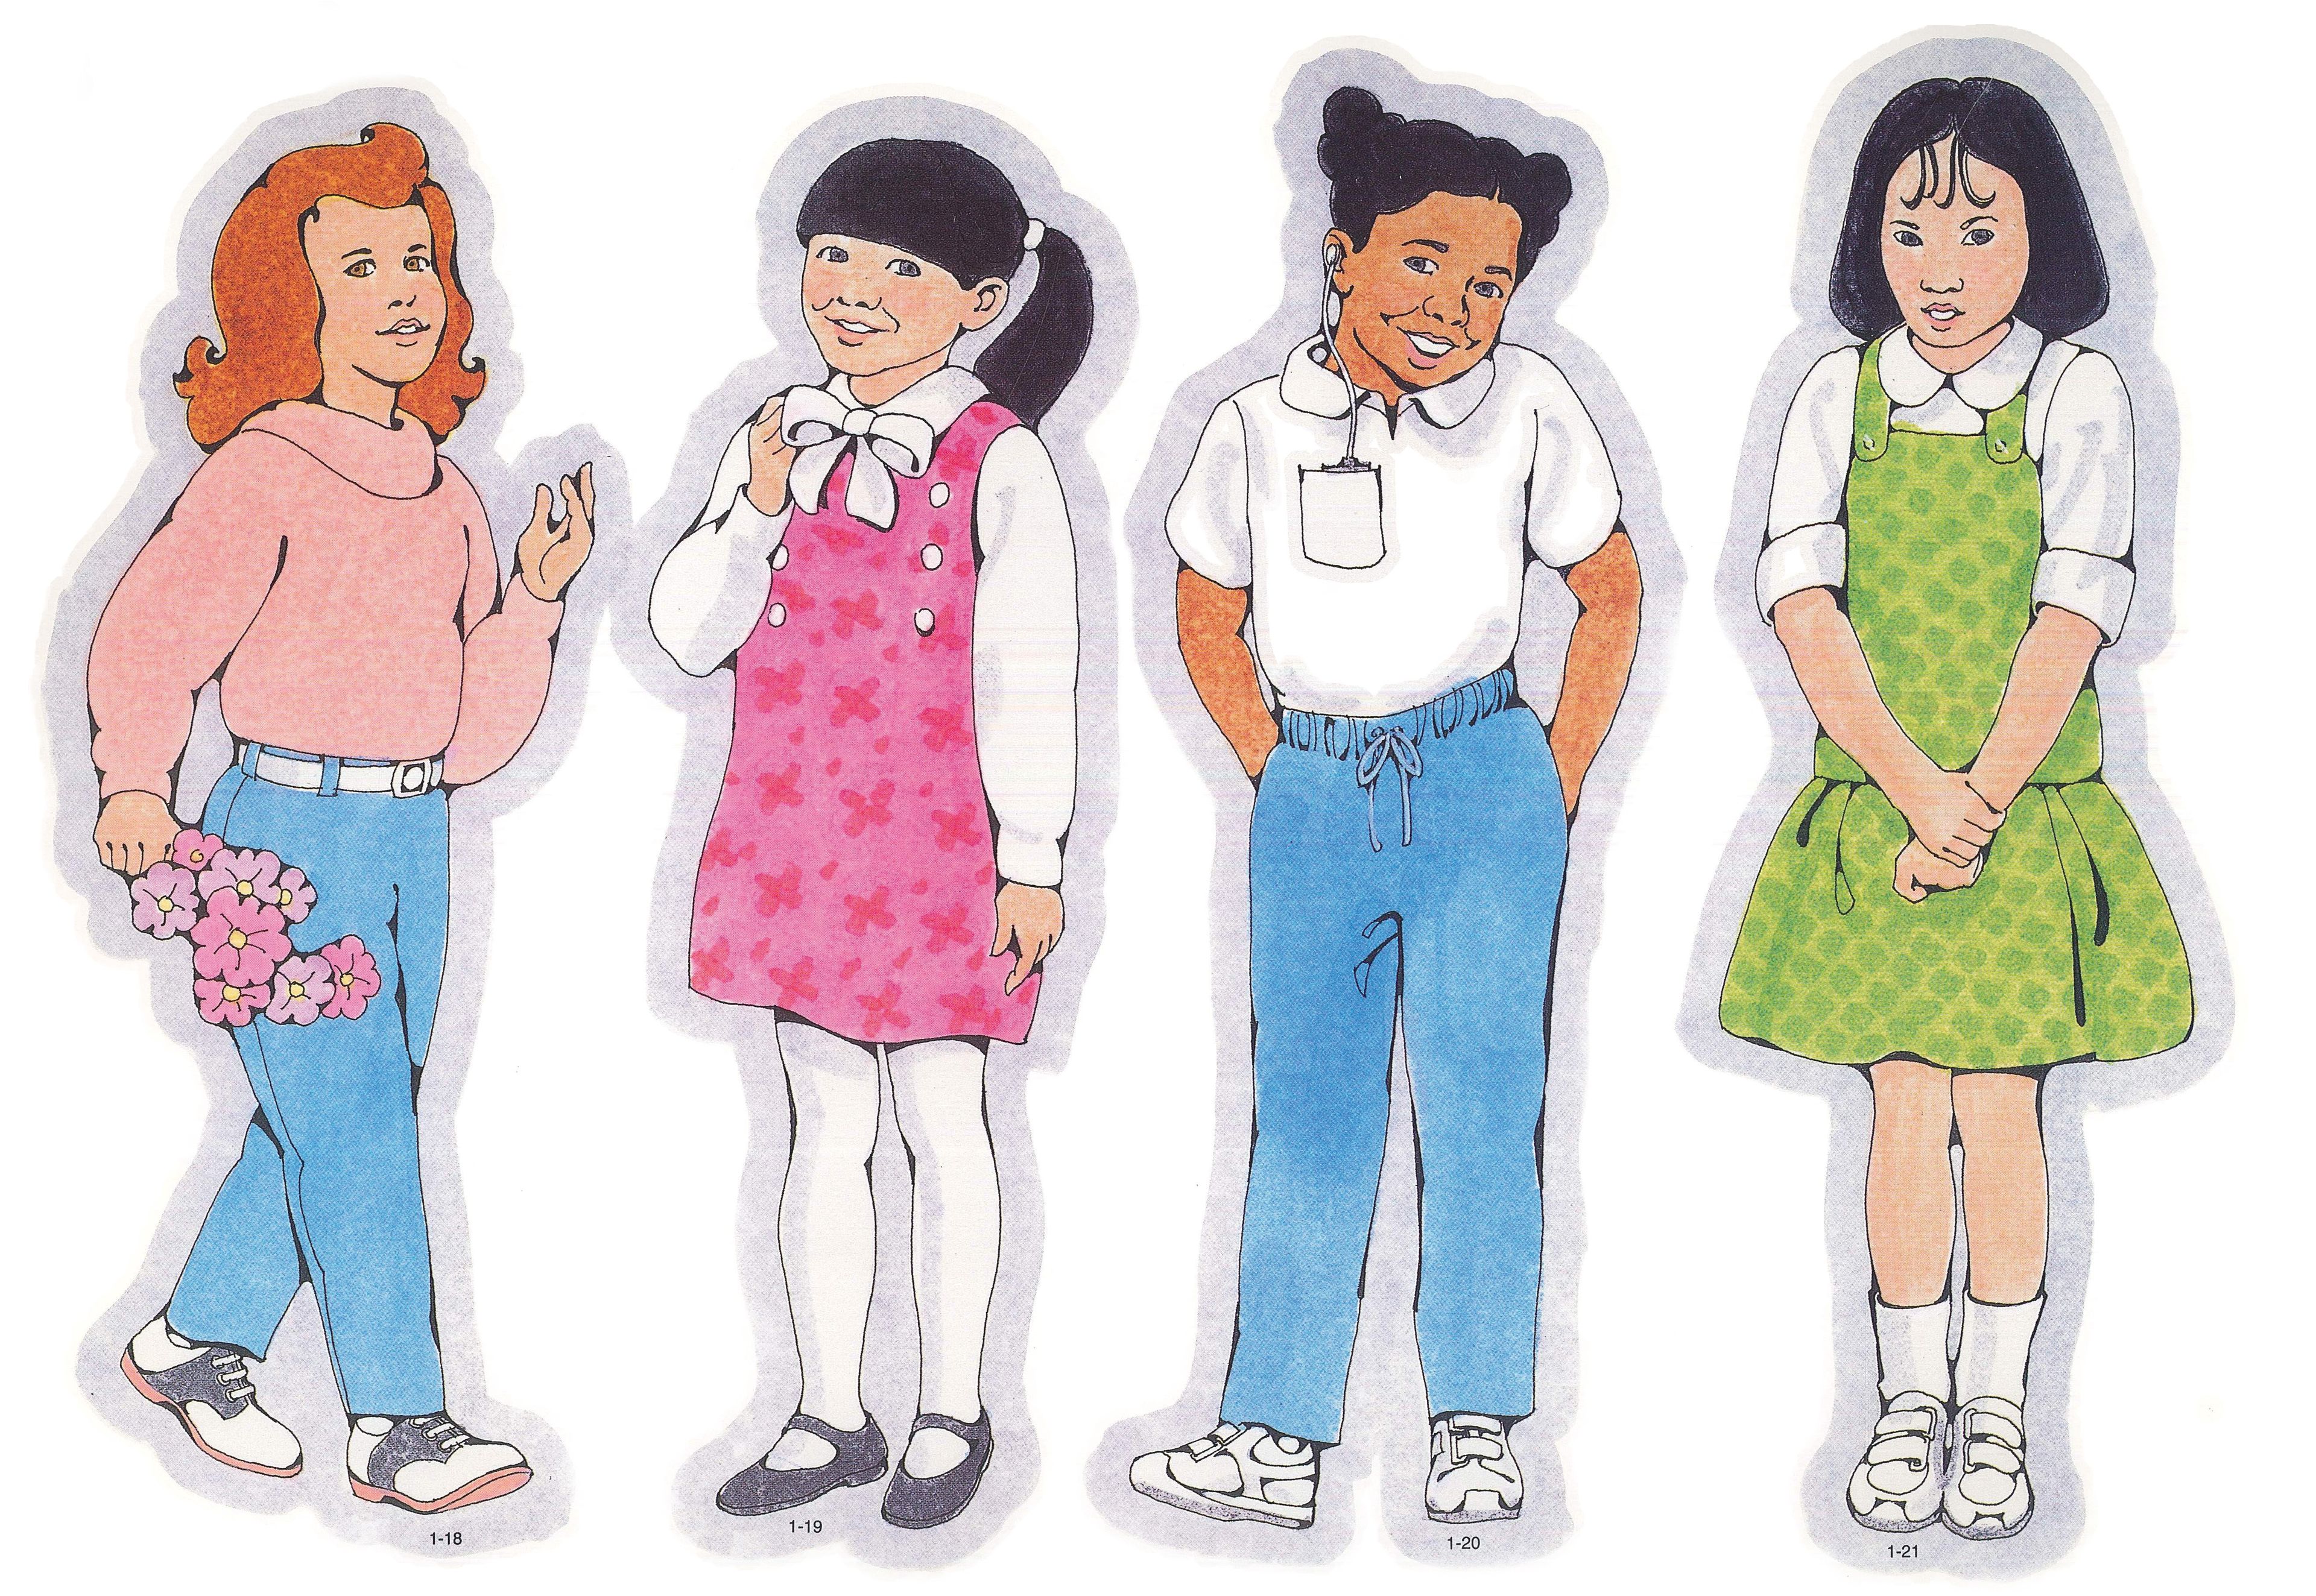 Primary Visual Aids: Cutouts 1-18, Girl from U.S.; 1-19, Girl from South America; 1-20, Girl from Africa with Hearing Aid; 1-21, Girl from Japan.